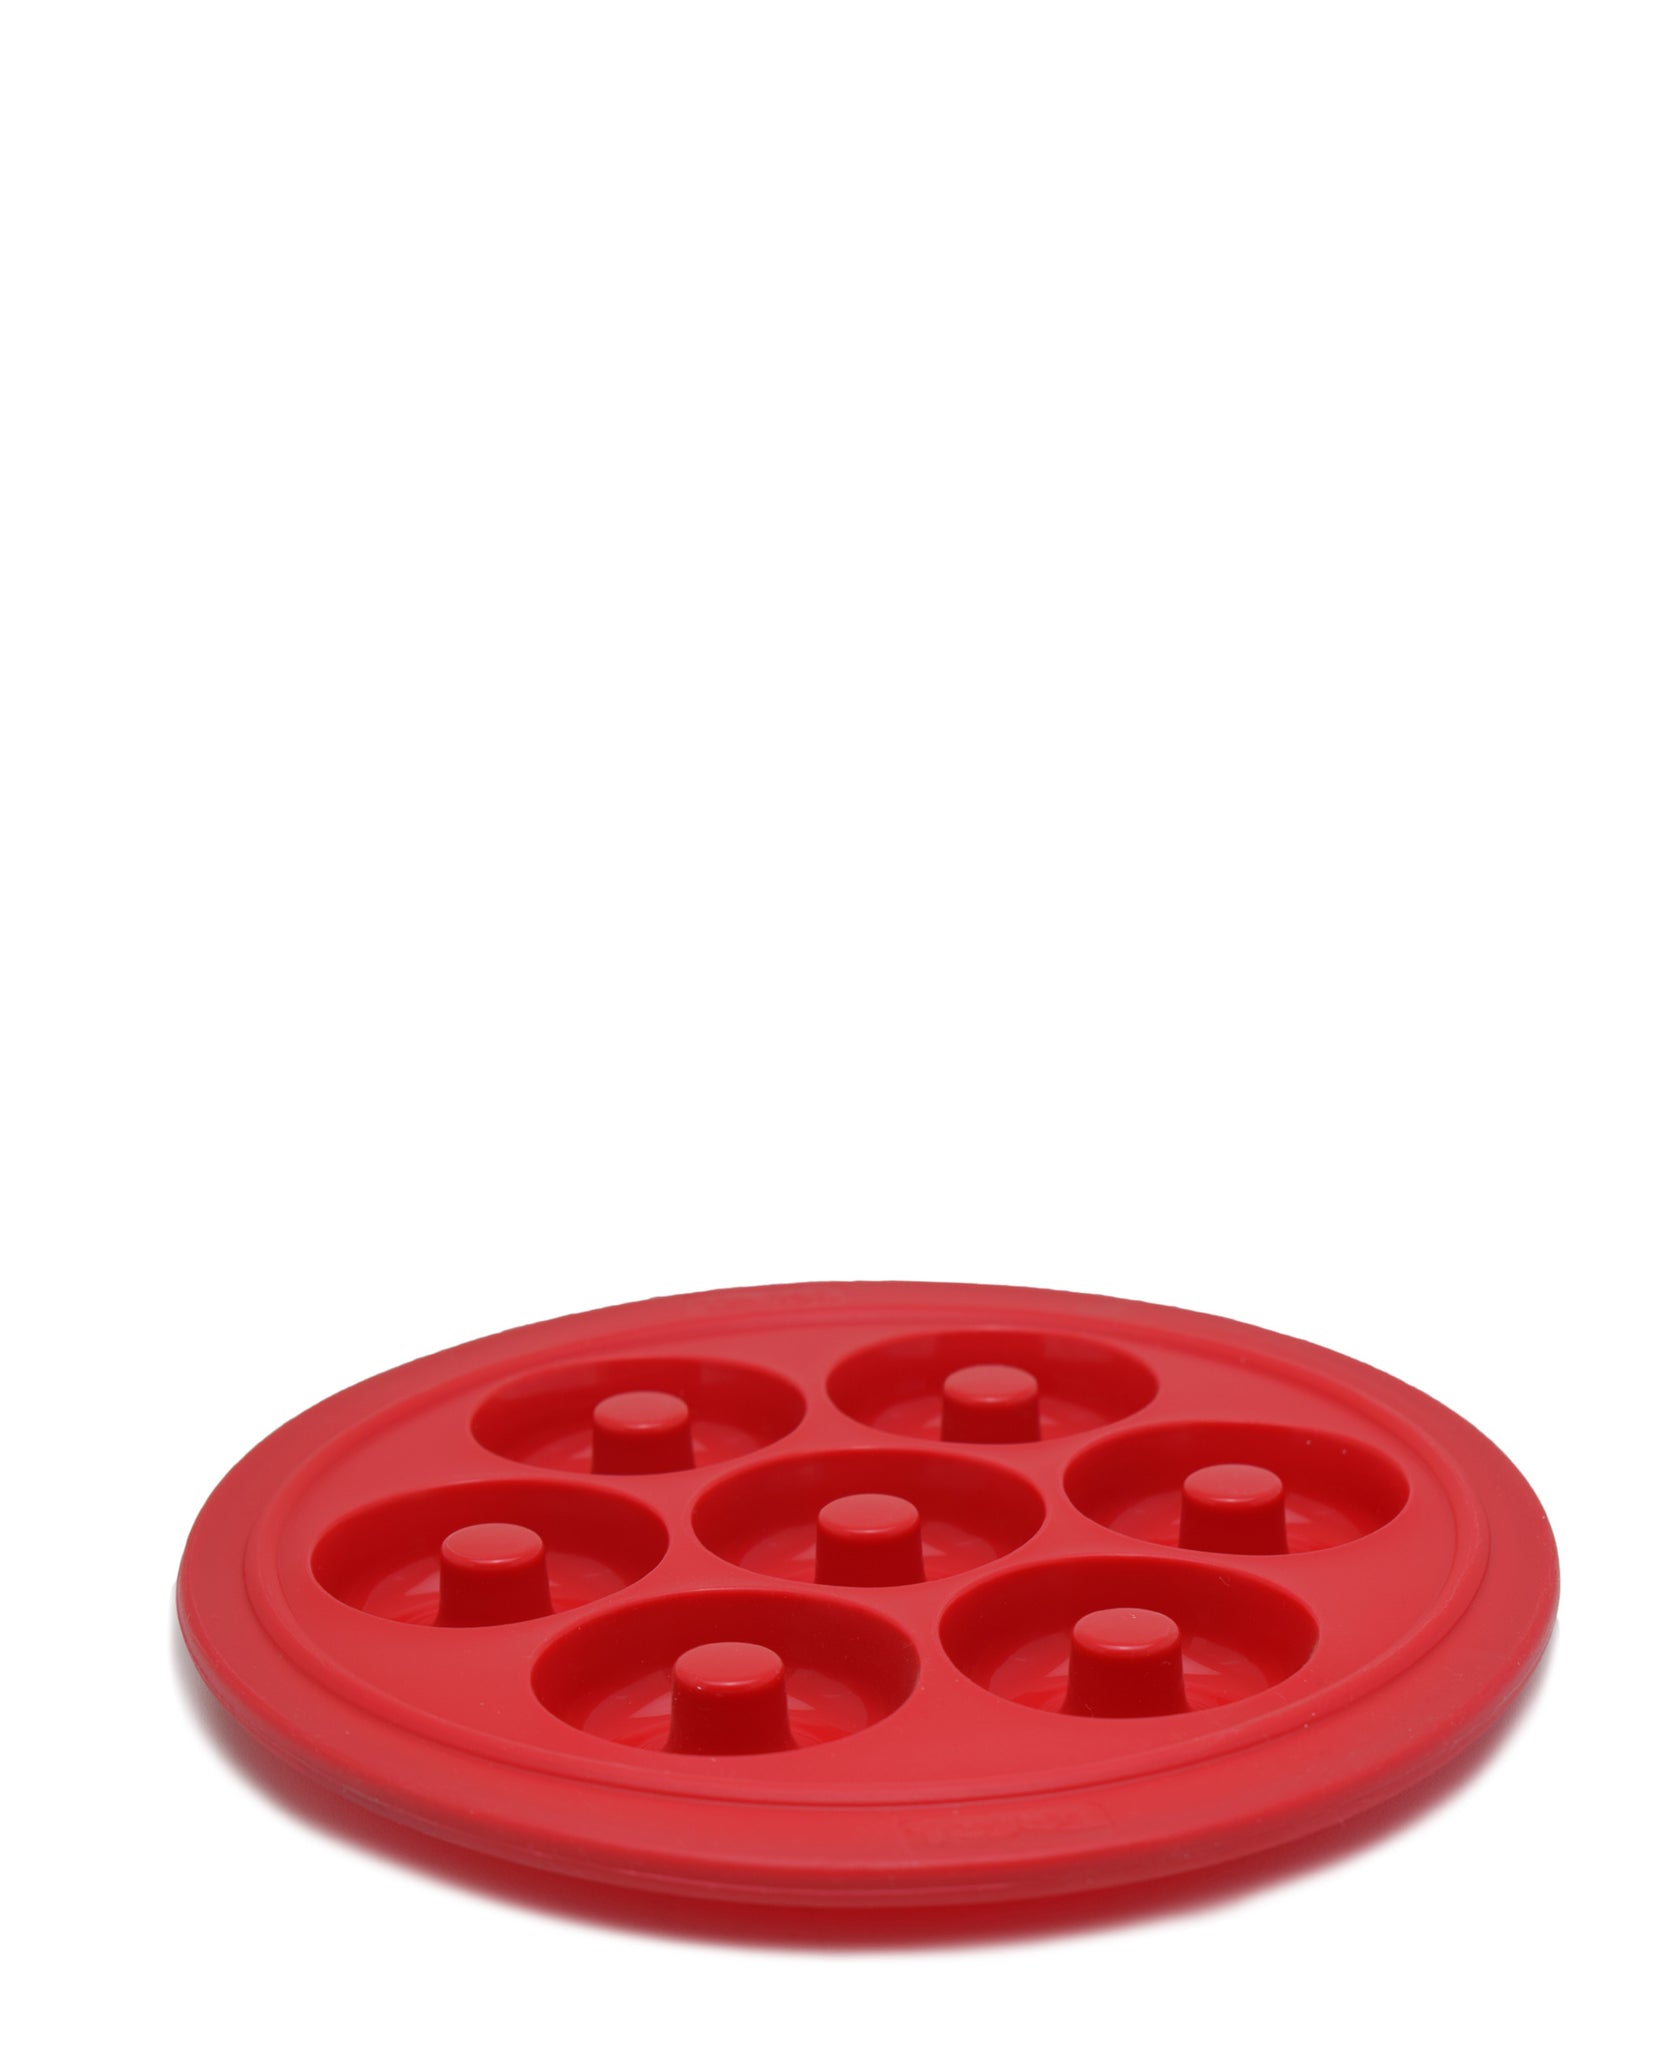 Tefal Proflex Silicone 7 Mini Donuts Bakeware - Red